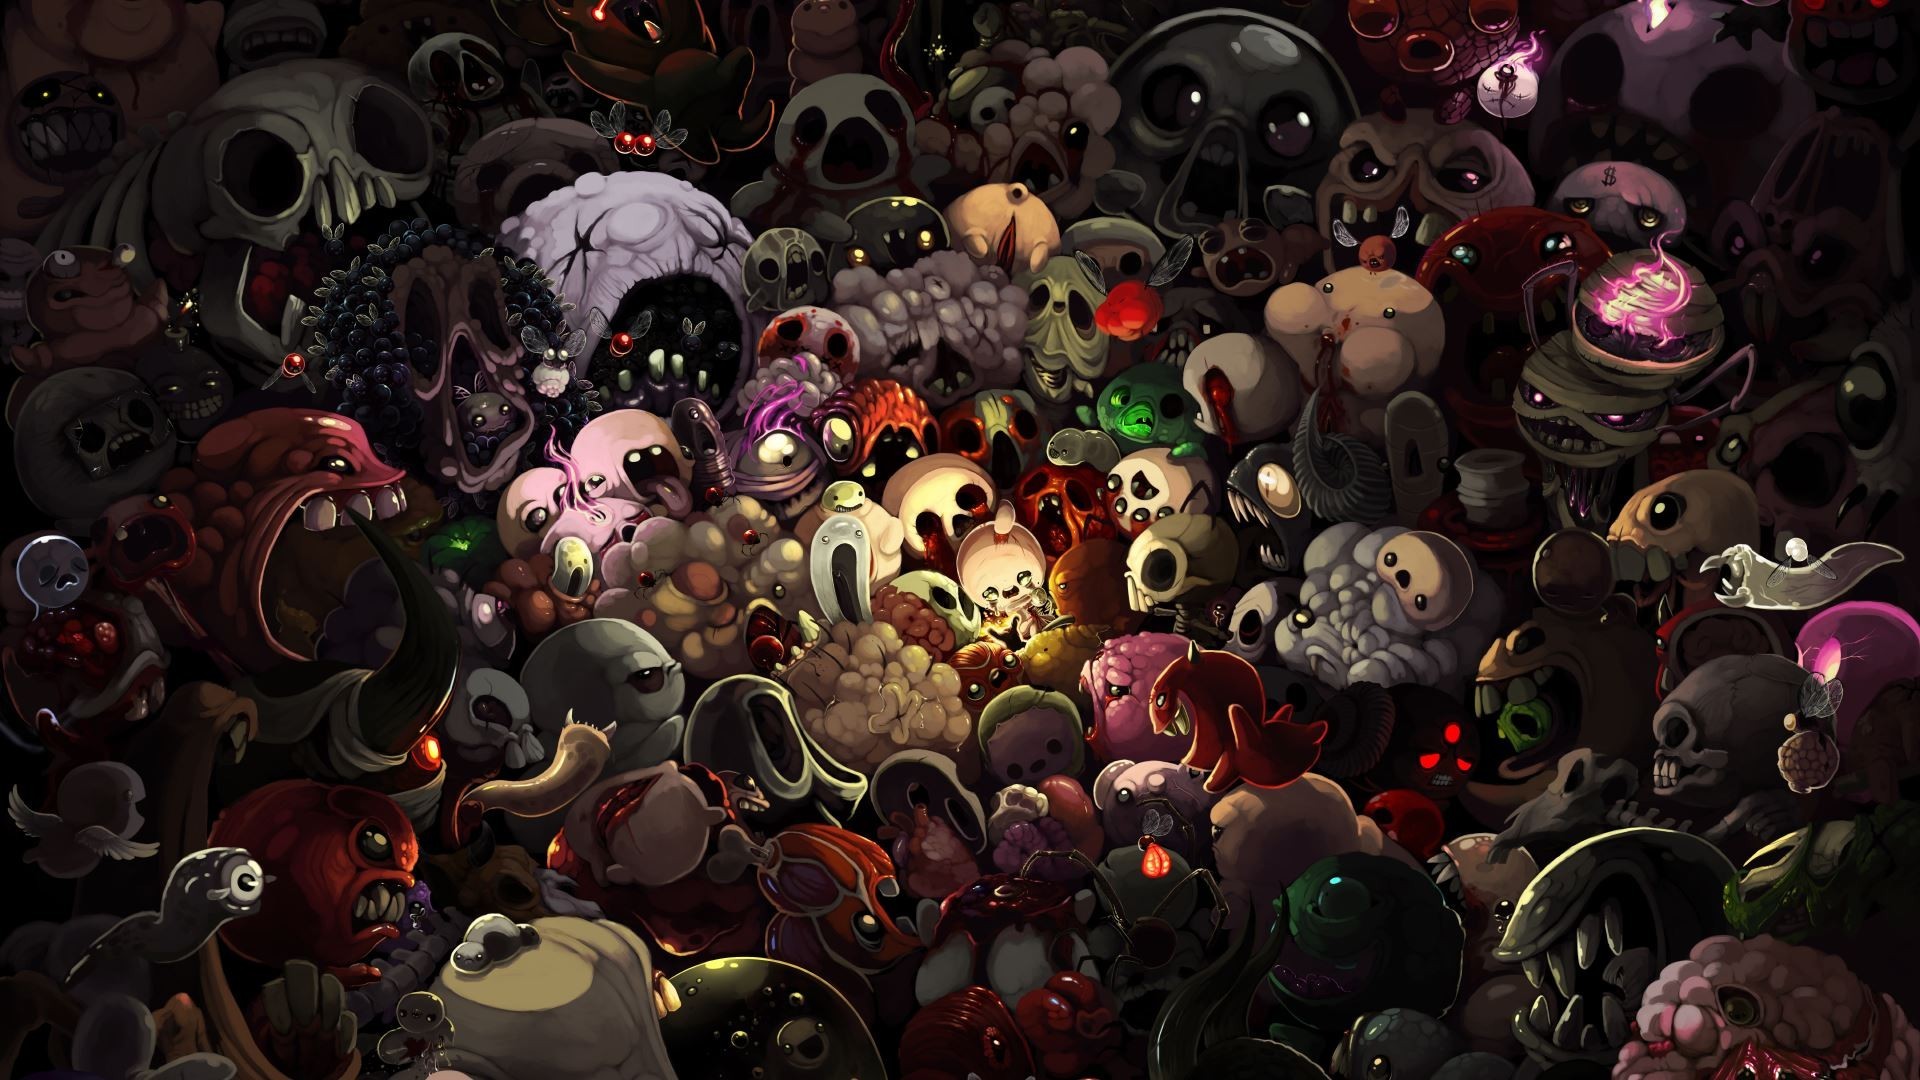 gaming wallpapers hd,crowd,people,darkness,art,illustration